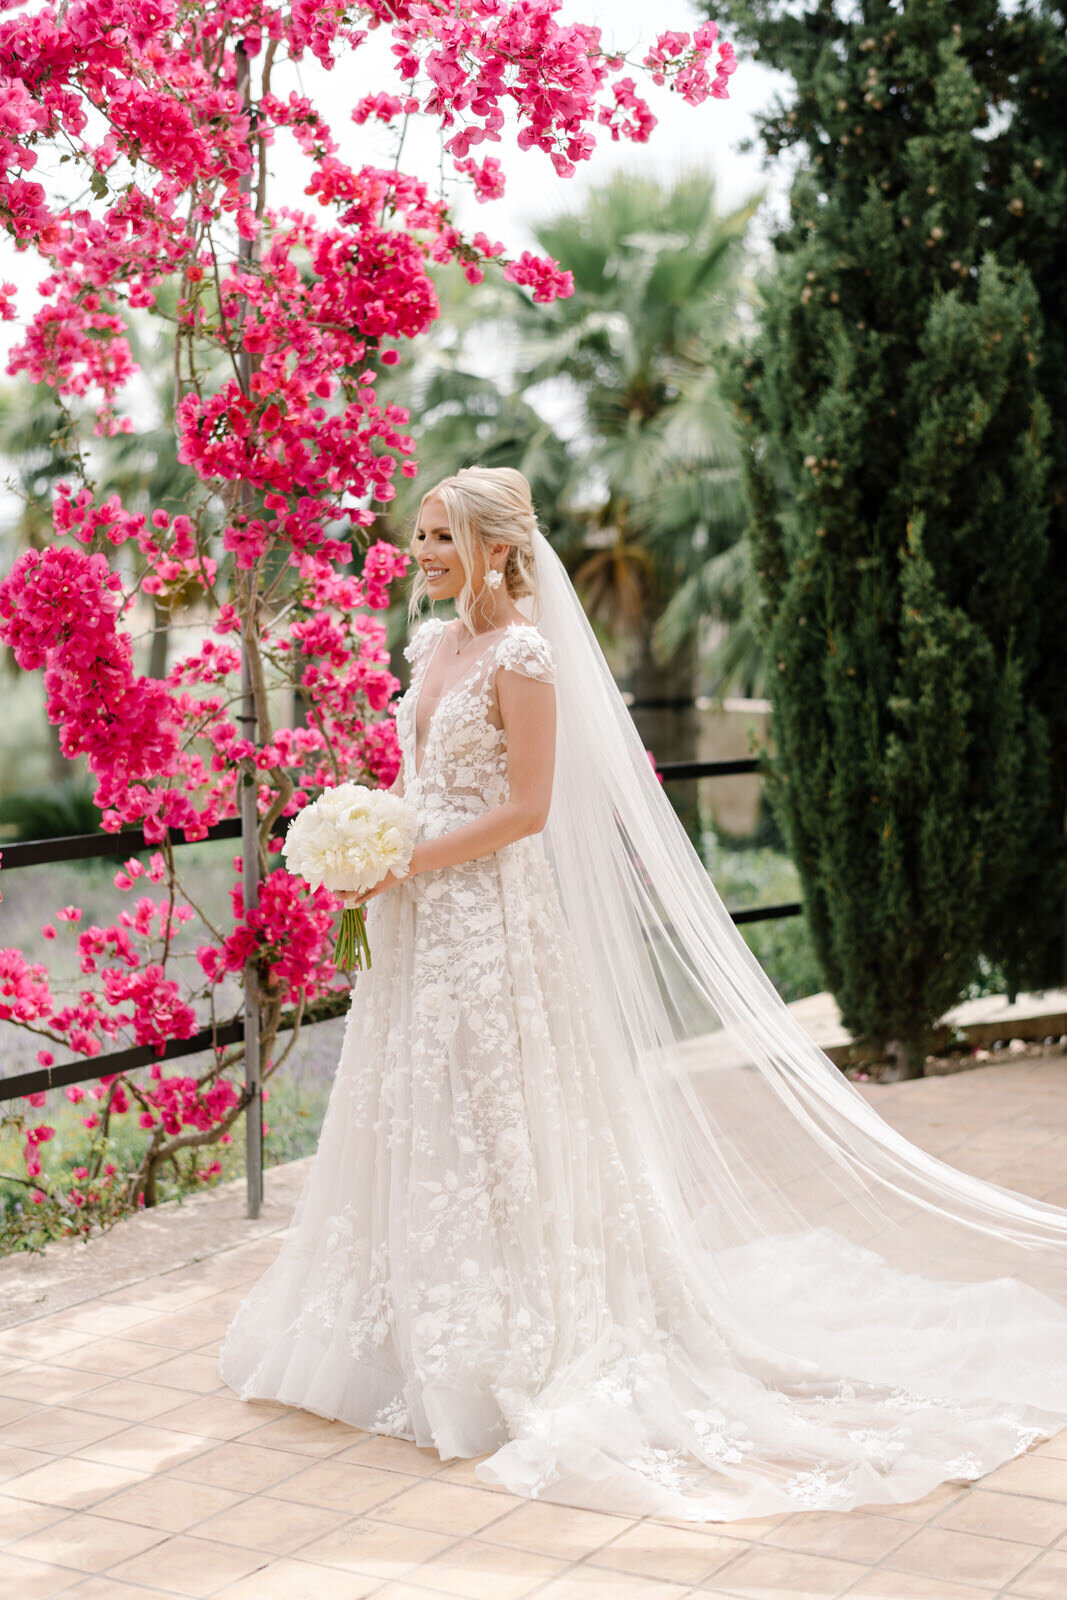 Ruby Holley in Muse by Berta wedding dress in Mallorca